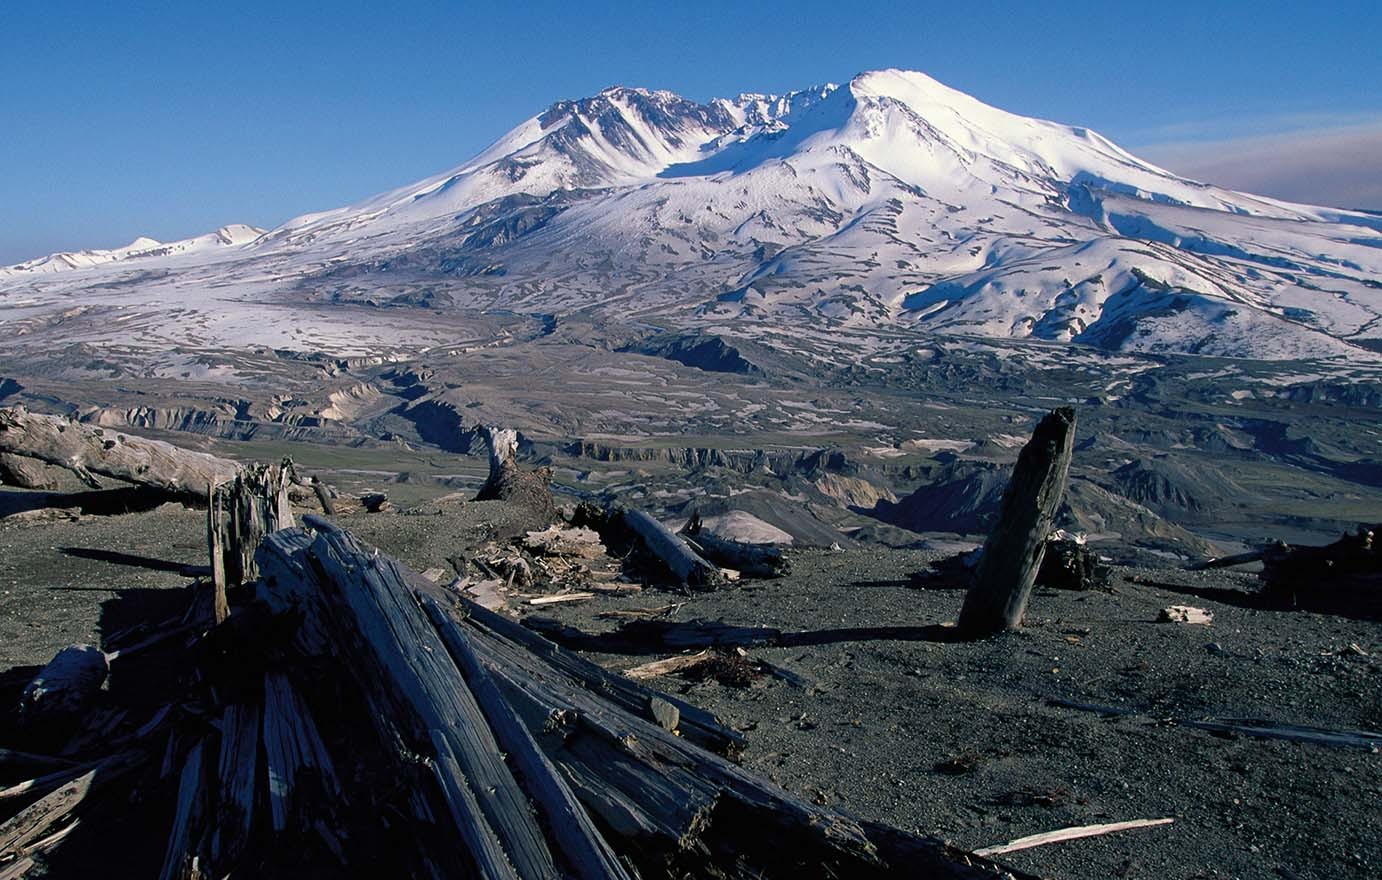 Mount St Helens 40 years on | Nature Reviews Earth & Environment